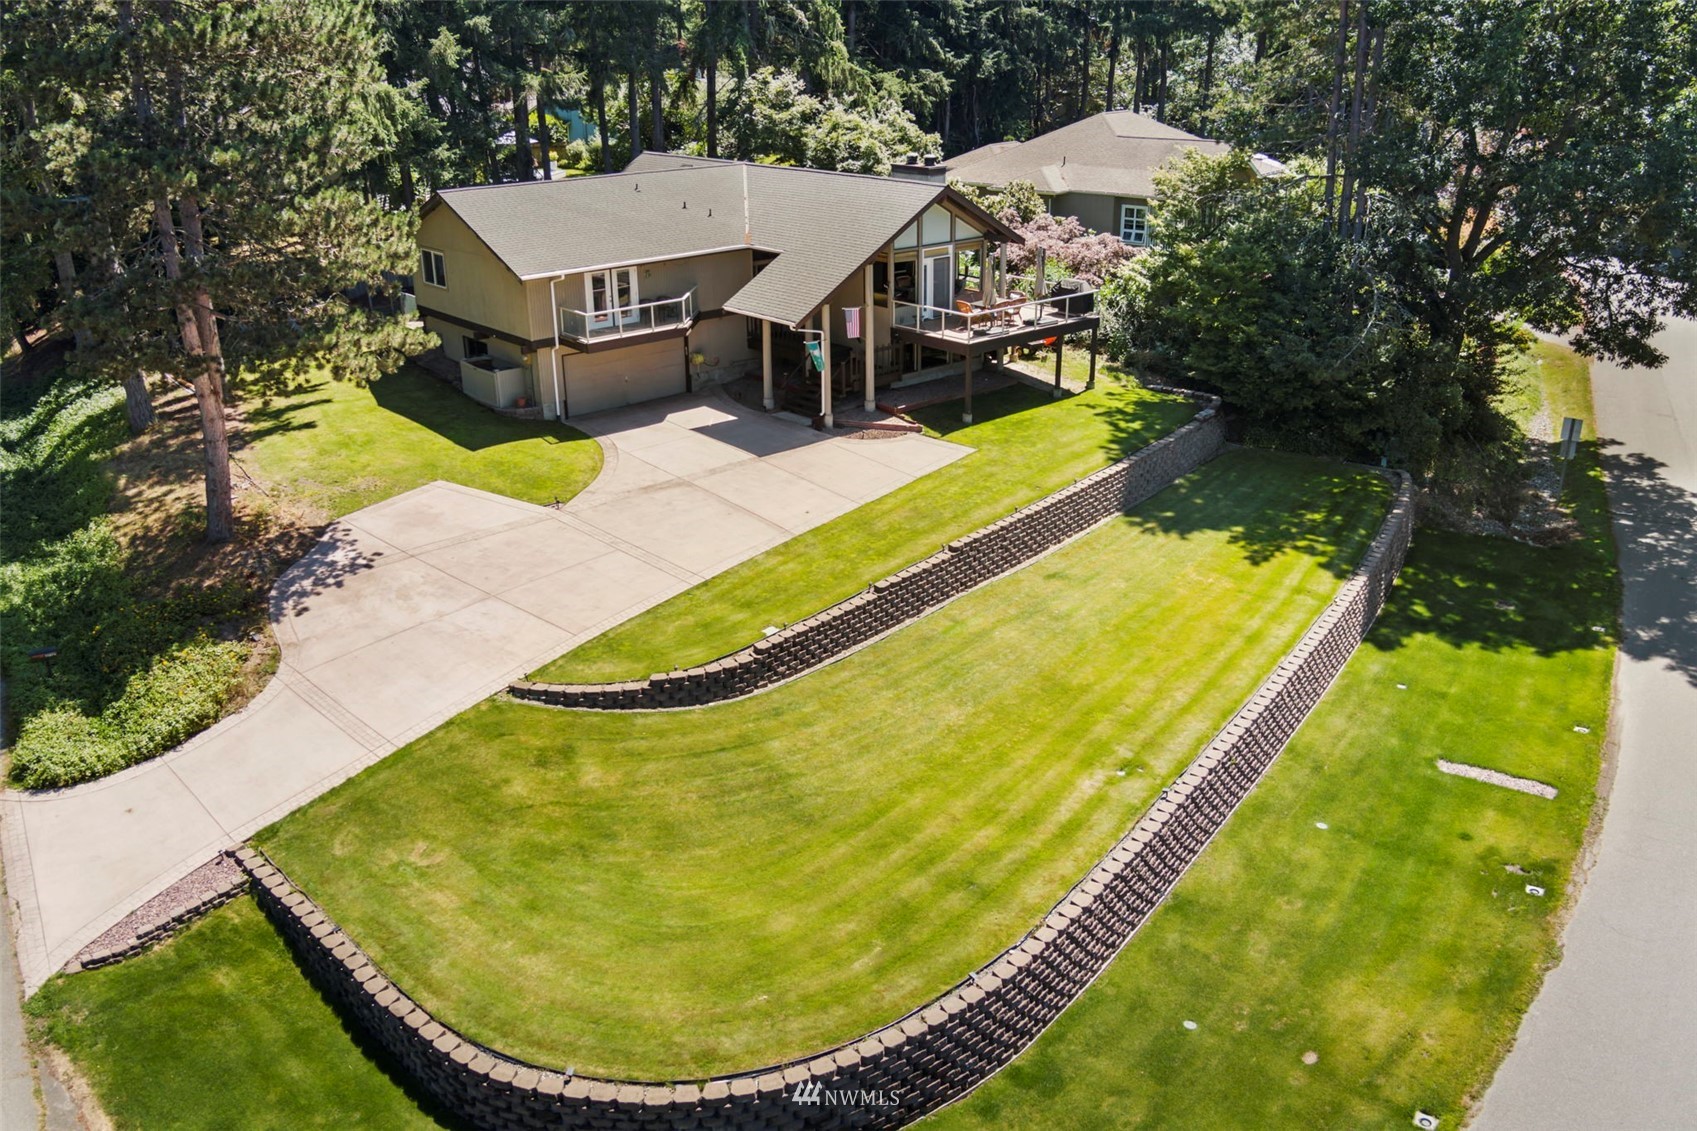 an aerial view of a house with swimming pool and trees